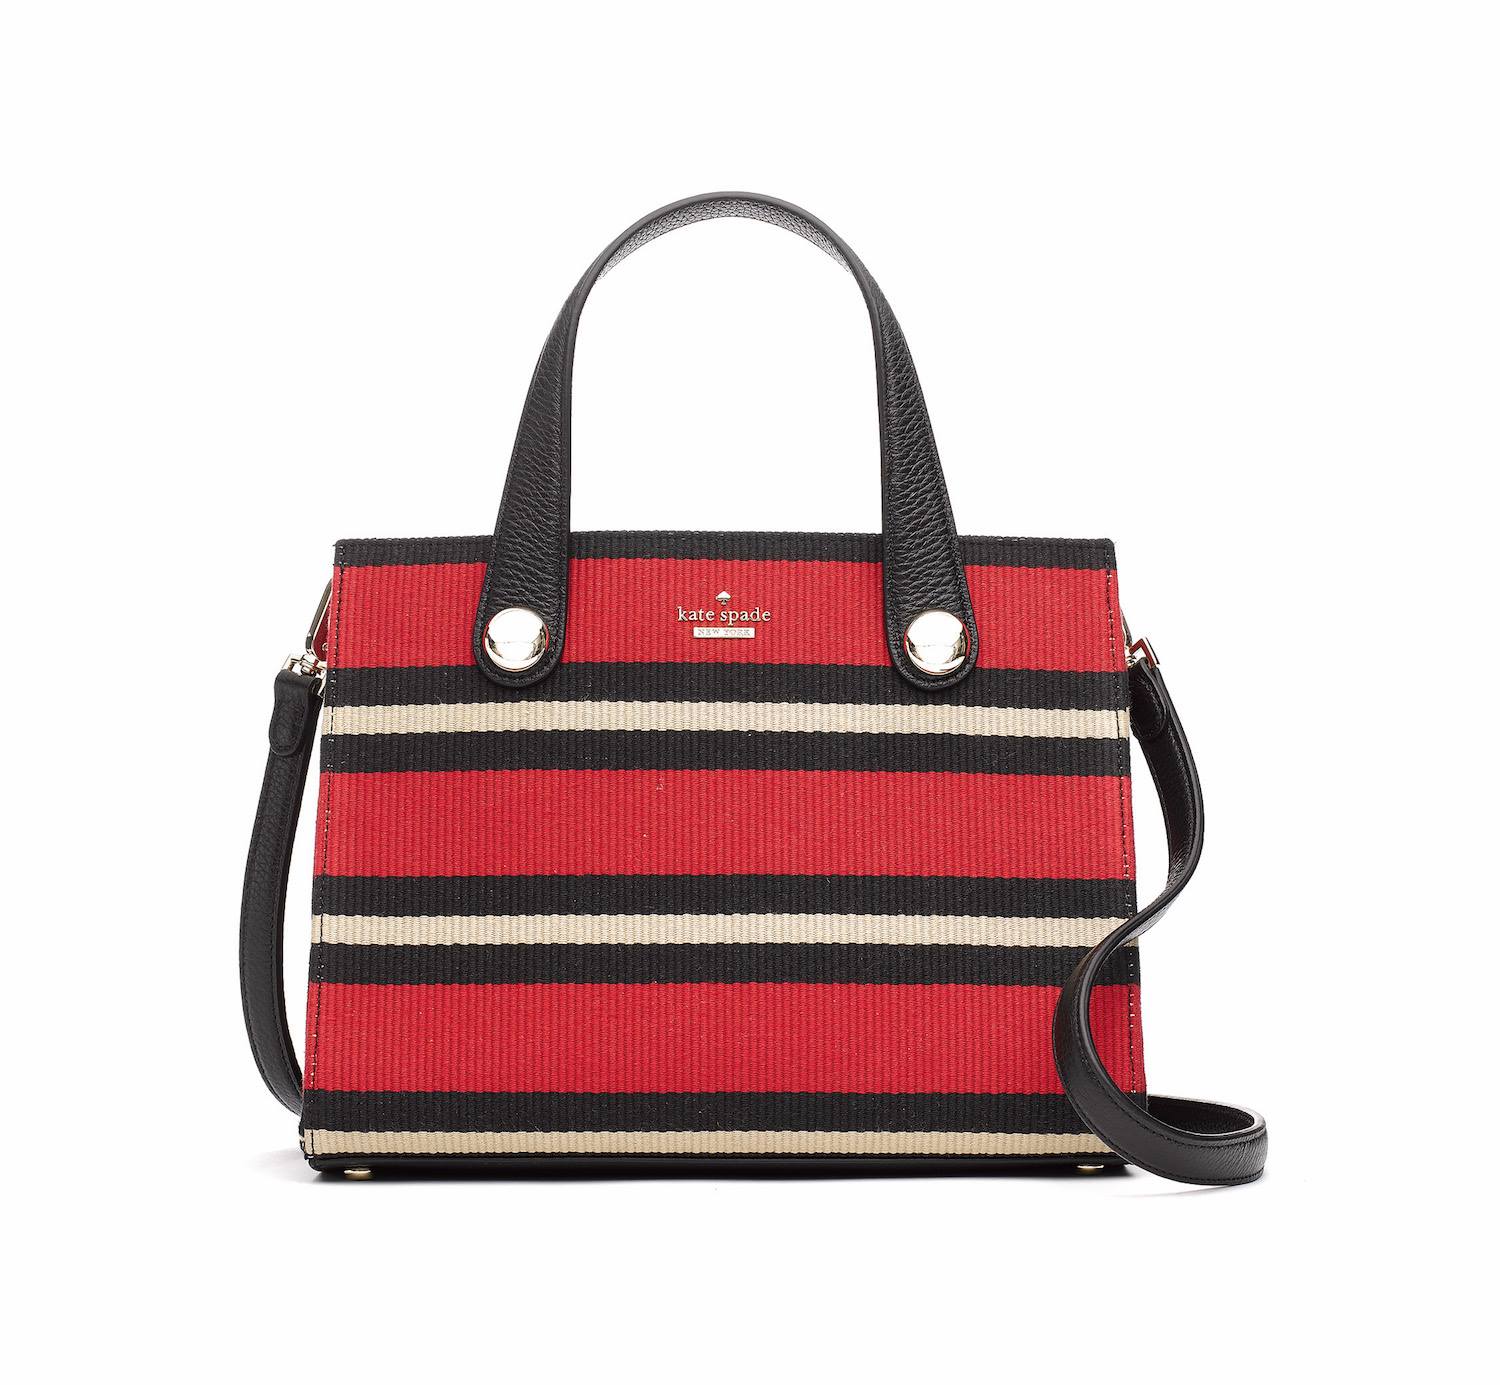 Kate Spade lives on in Spring 2018 collection